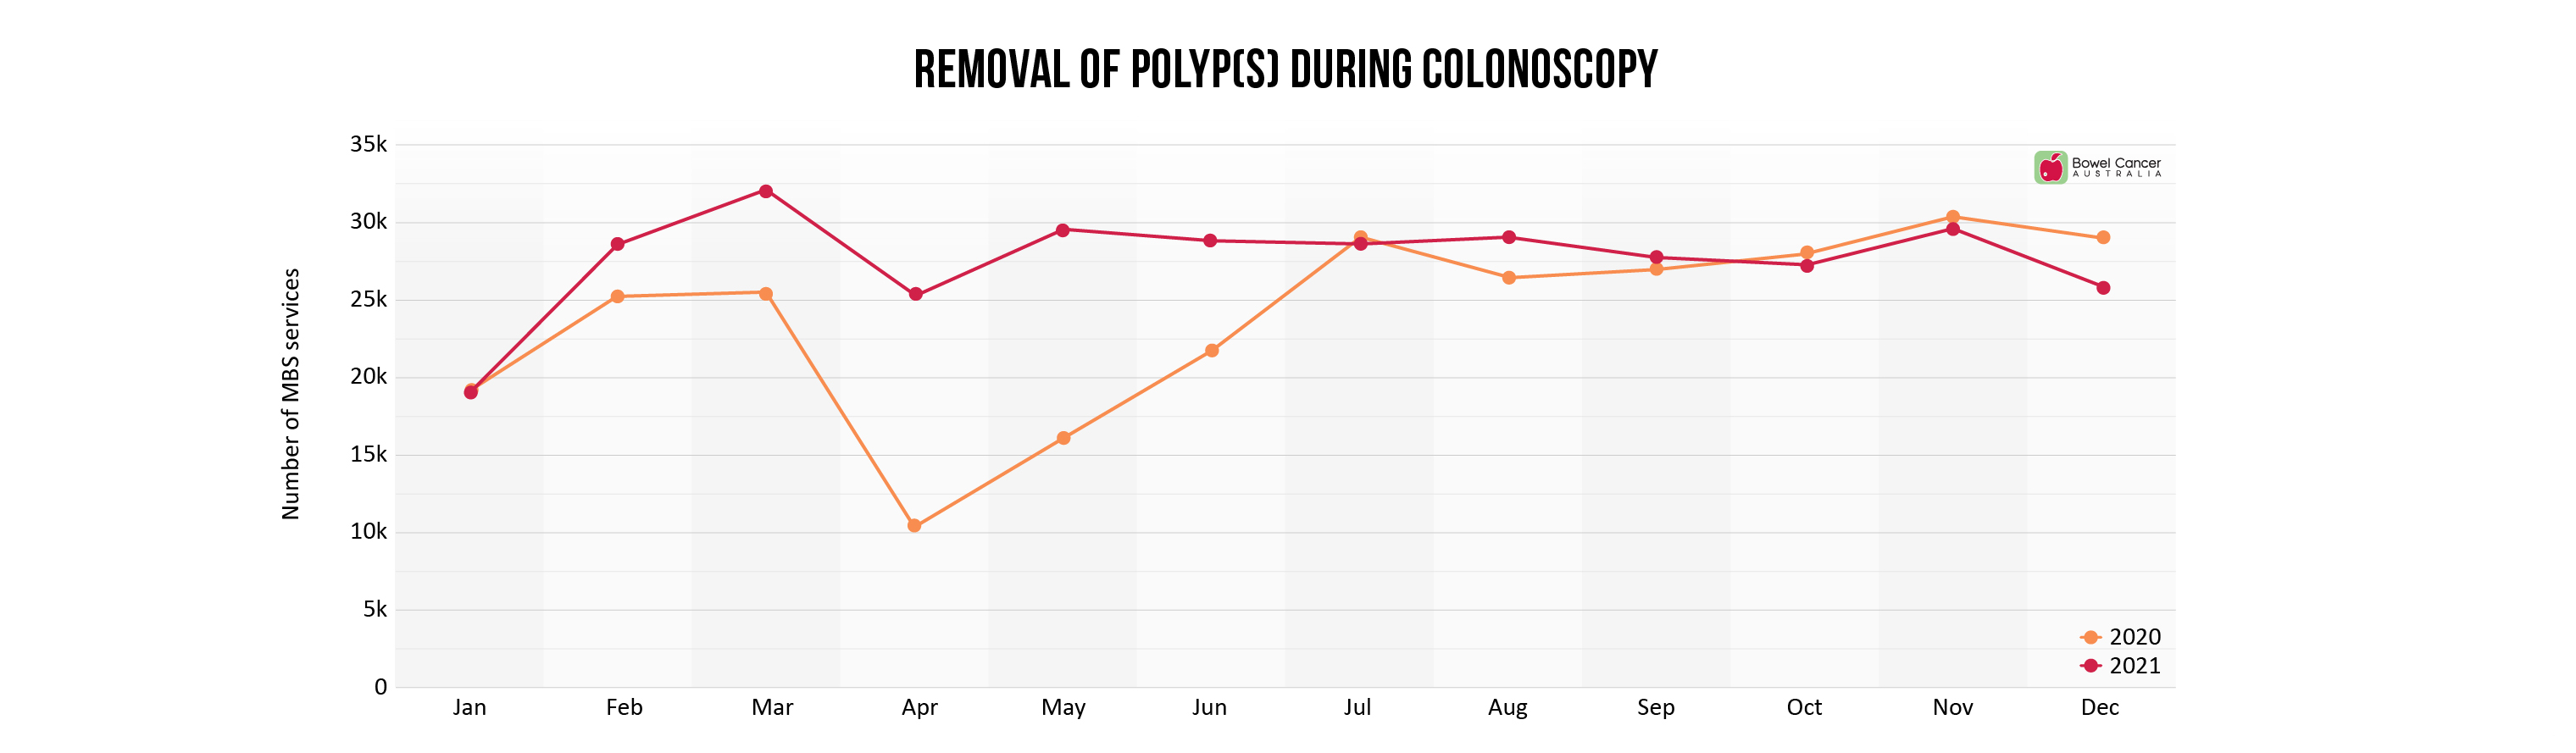 Removal of polyp during colonoscopy